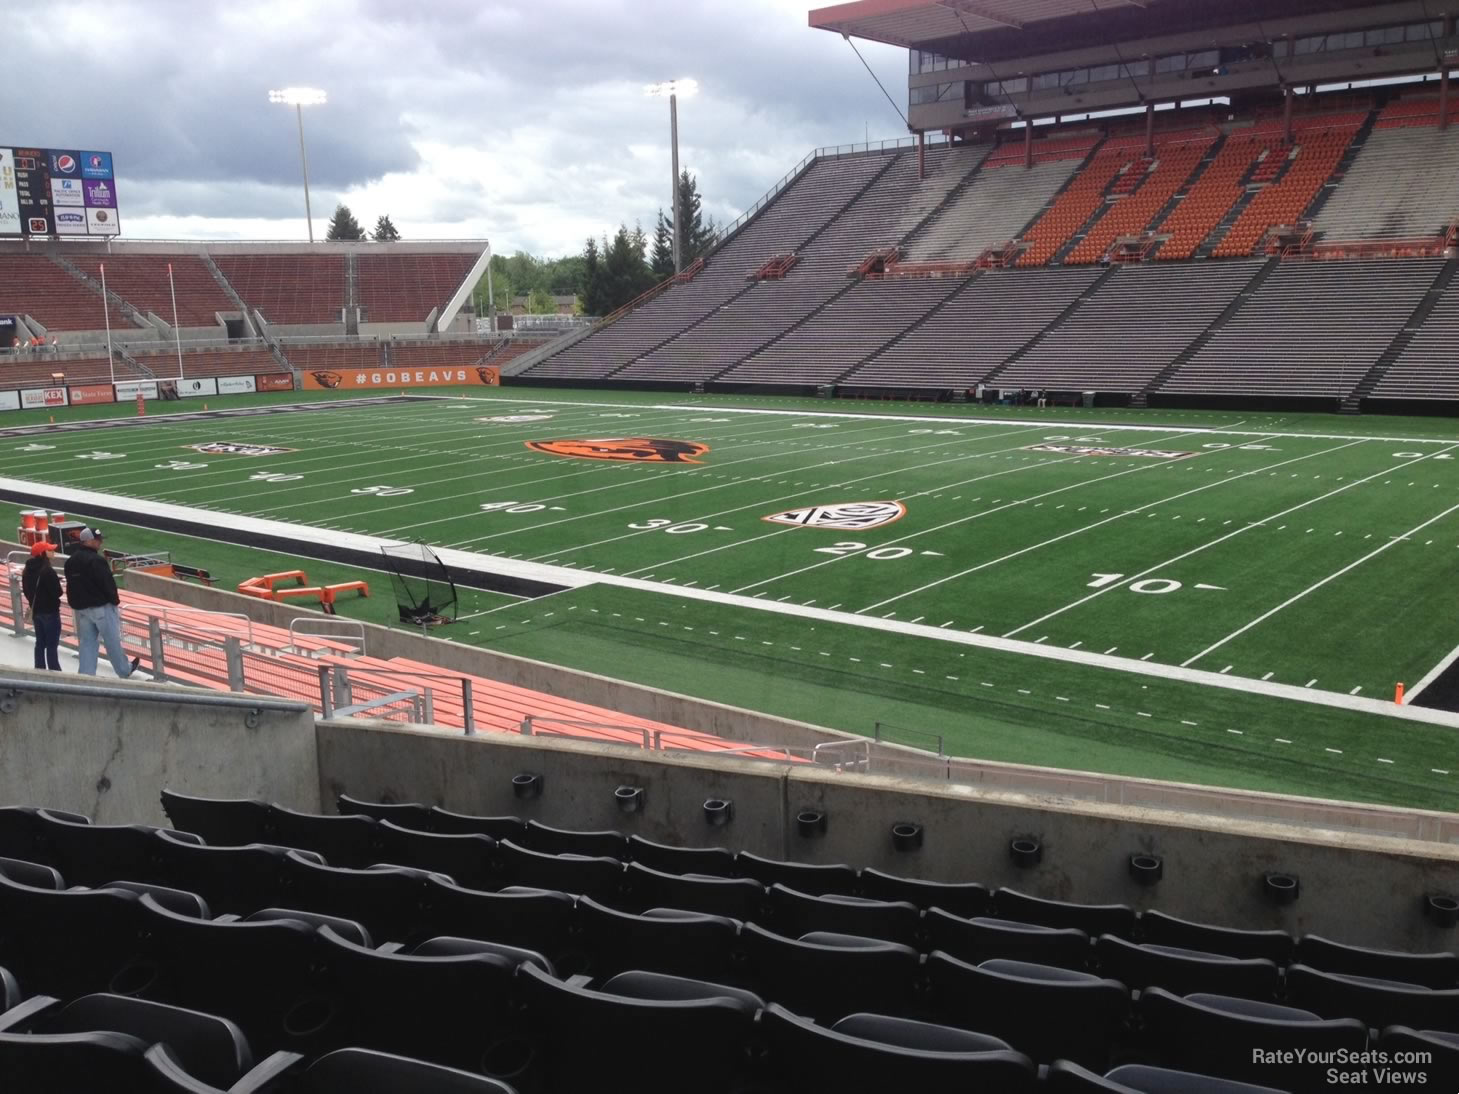 section 112, row 34 seat view  - reser stadium